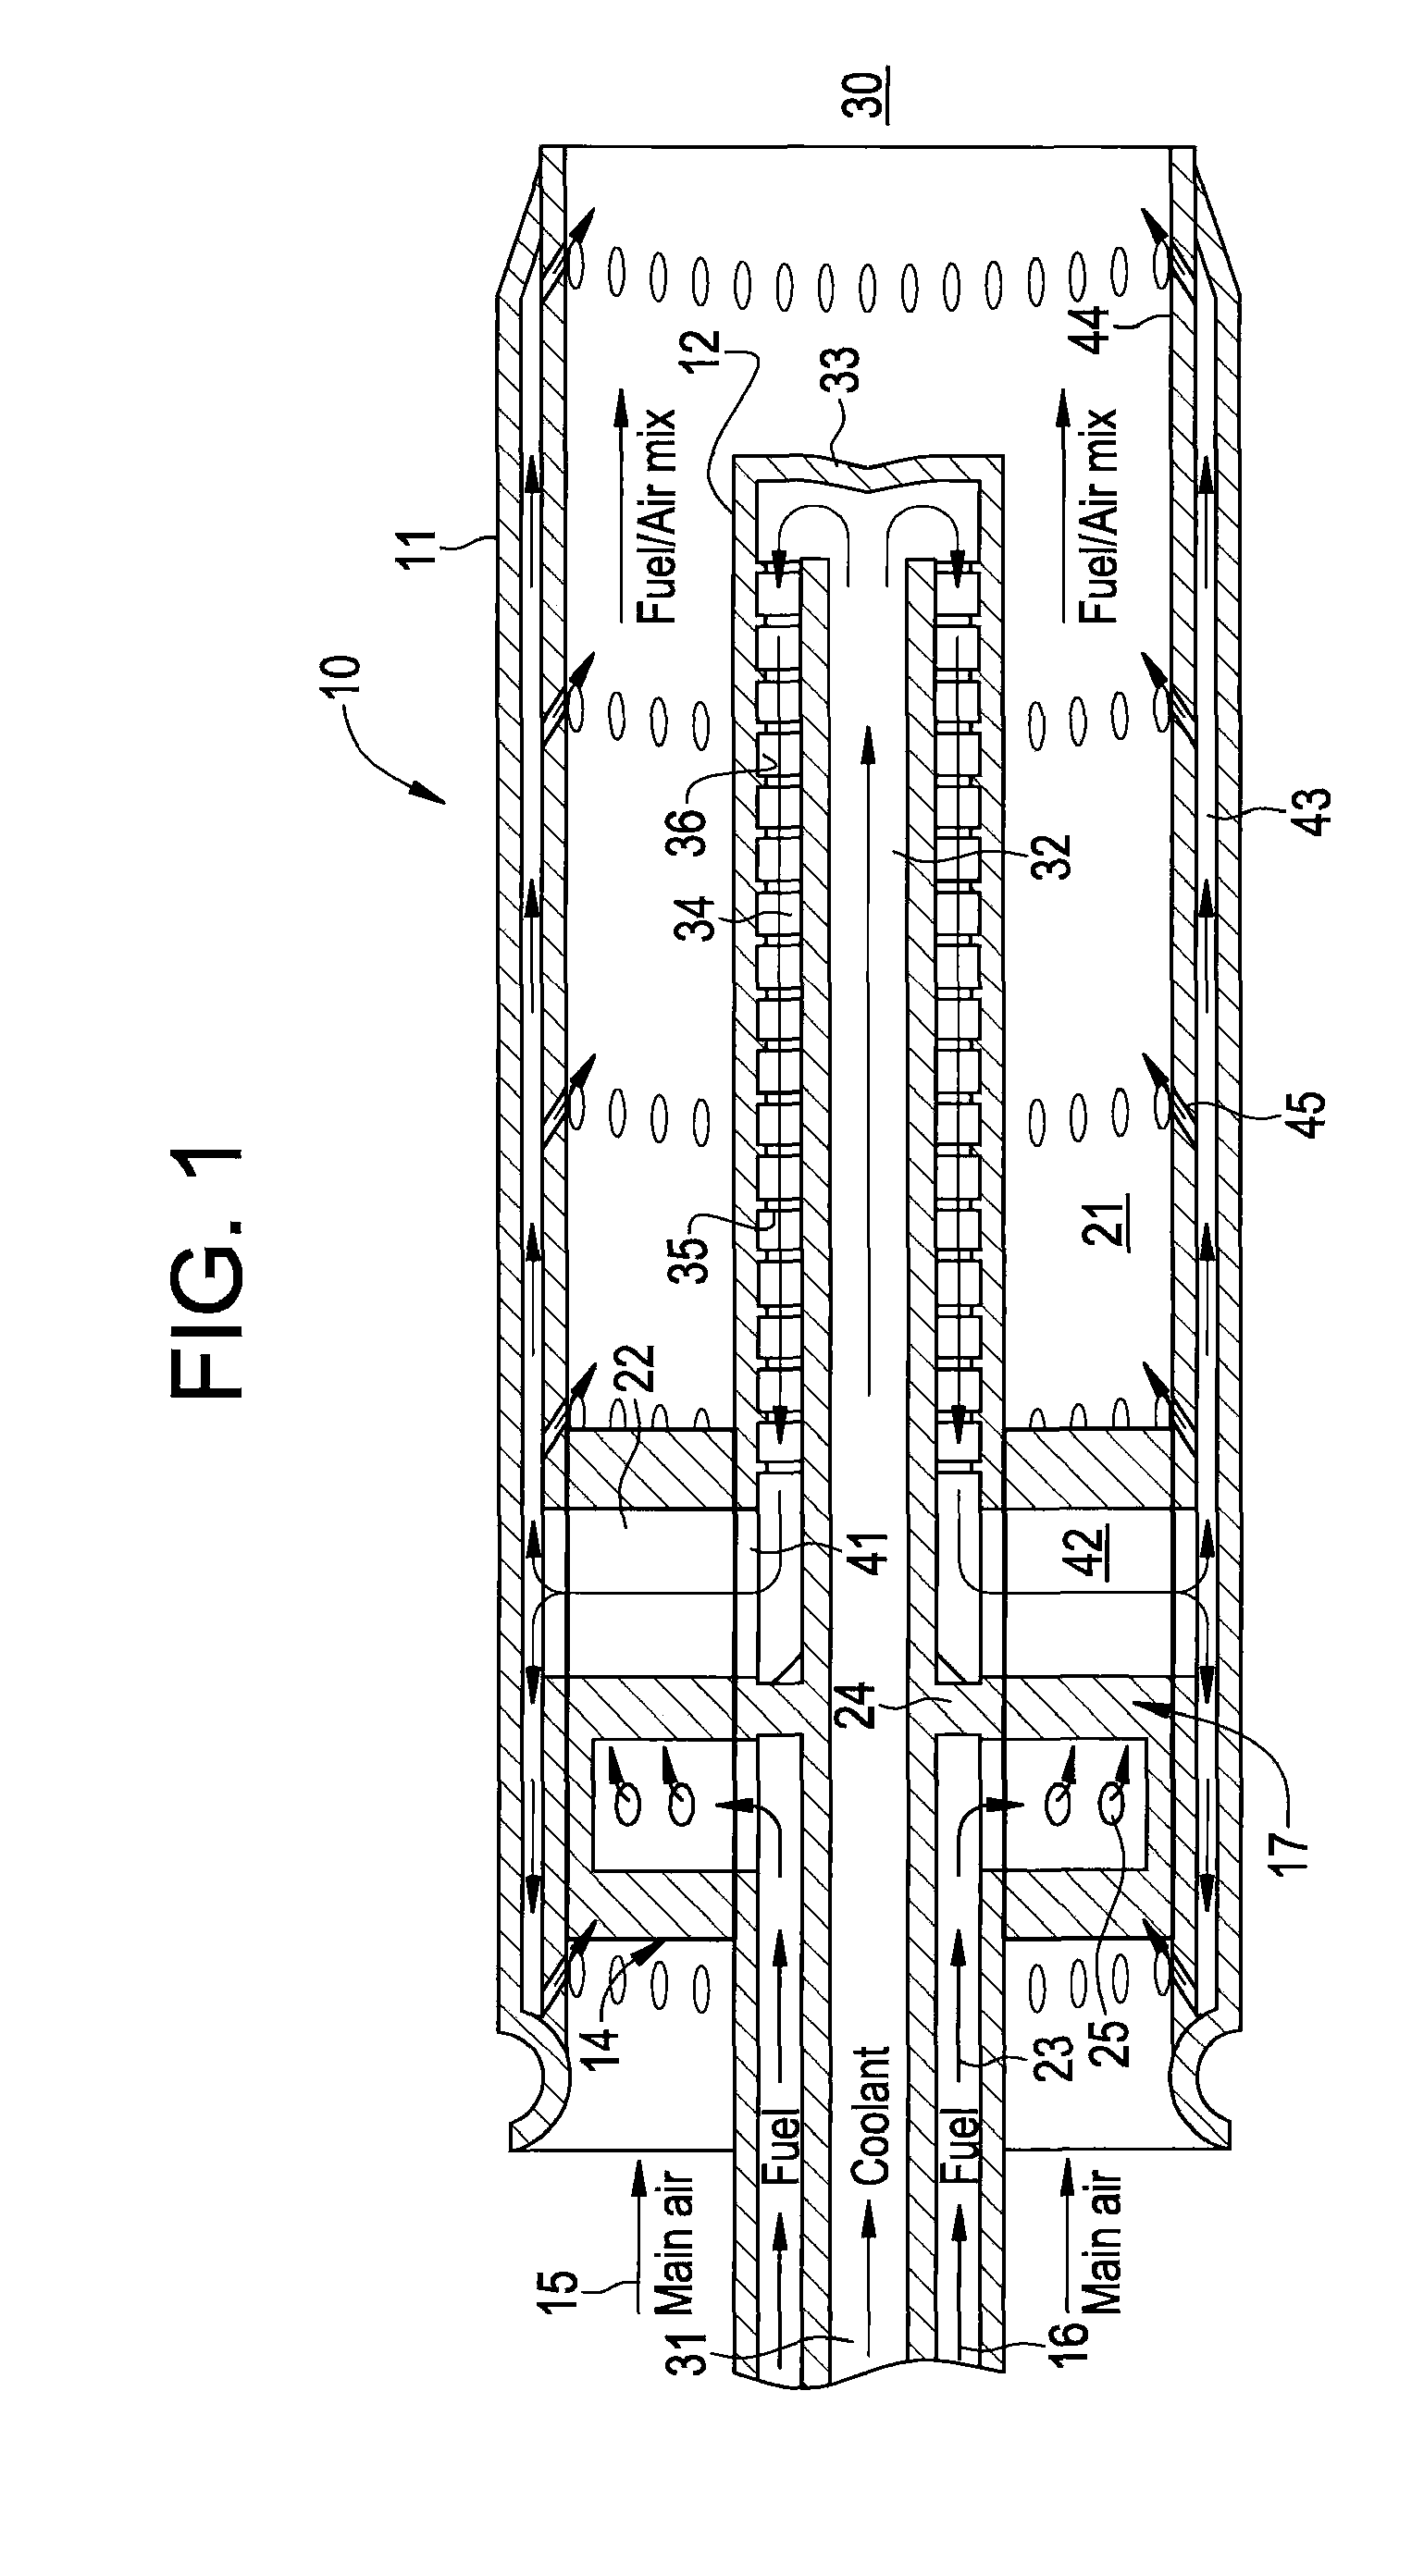 Flame holding tolerant fuel and air premixer for a gas turbine combustor